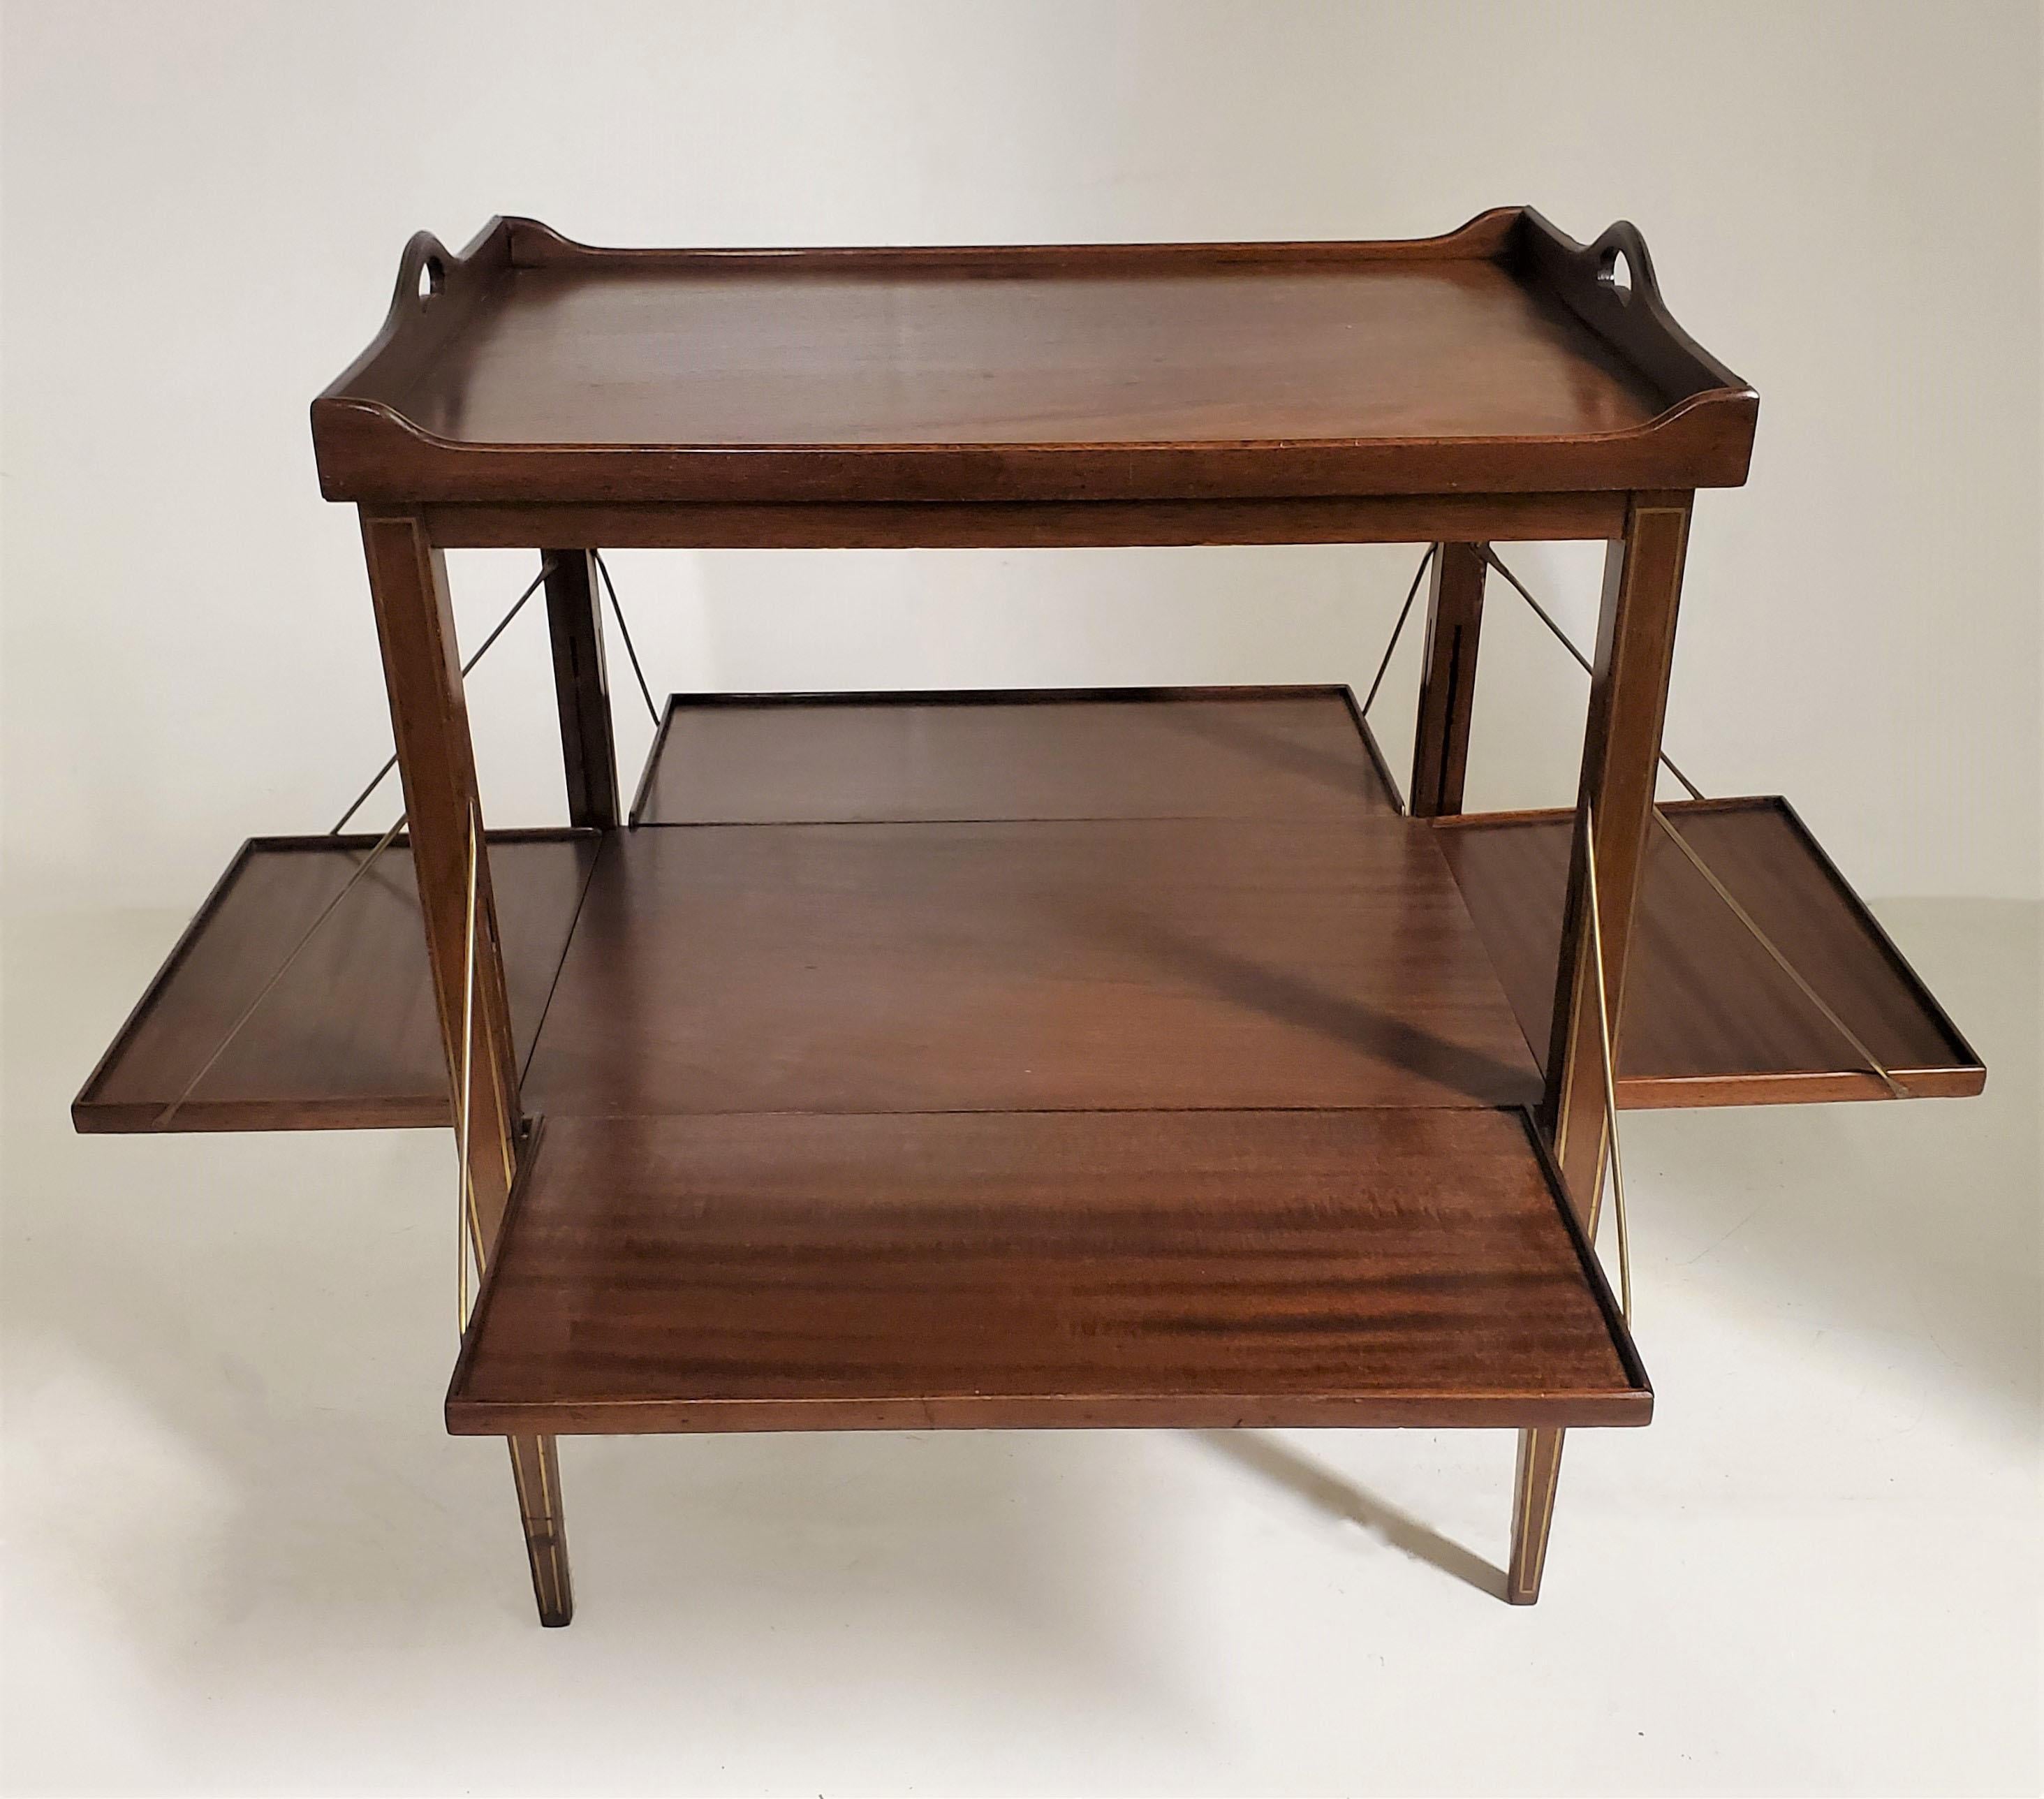 An unusual ribbon striped mahogany side table with brass inlay set into the attached tray frame and along the tapered elegant legs. This table features brass rod supported sides that modify to drop down and expand on all four flanks providing